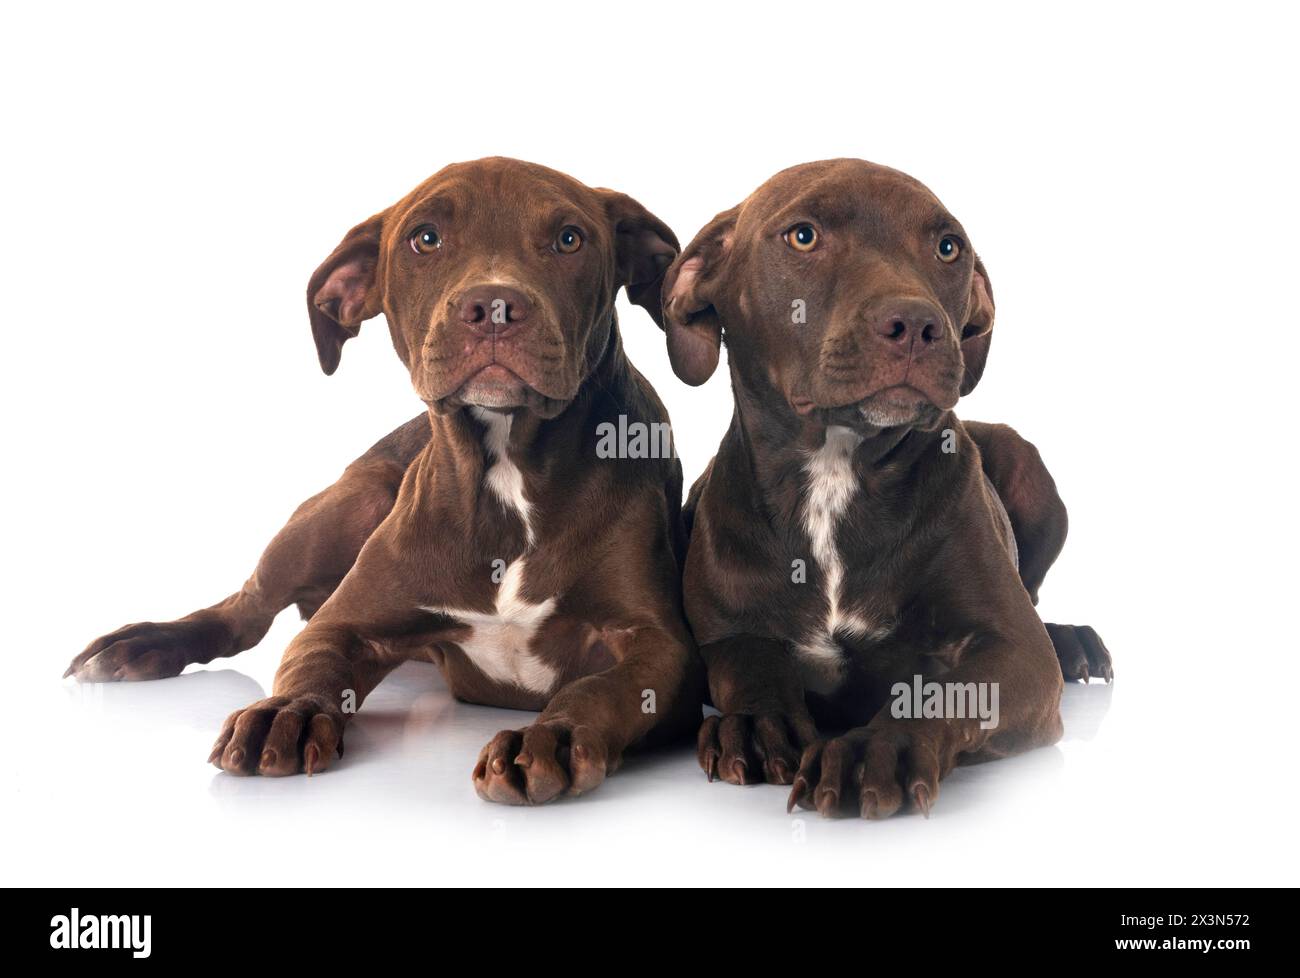 american pitbull terrier posing in front of white background Stock Photo